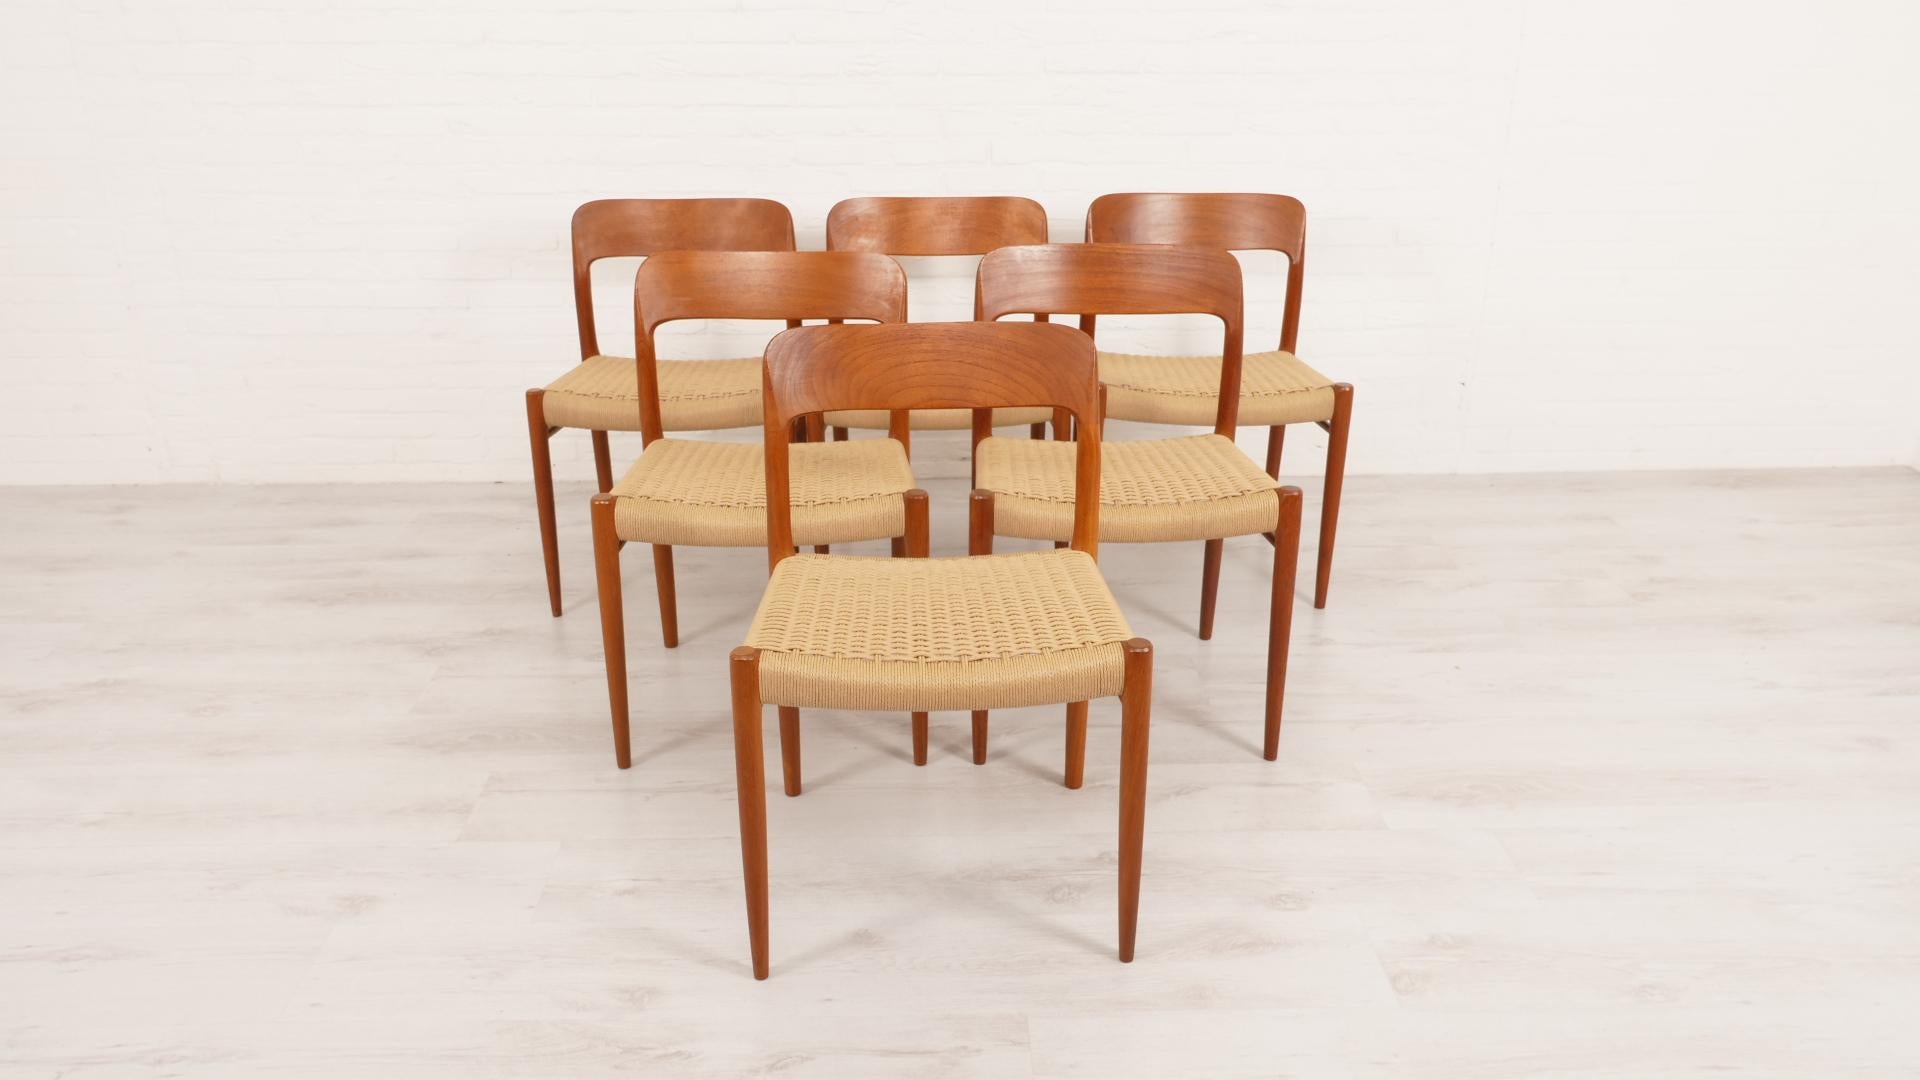 Set of 6 beautiful Danish vintage dining chairs. These chairs were designed by Niels Otto Møller. The chairs are finished in Teak and fitted with new papercord.

Design period: 1950 - 1960
Style: Mid-century modern - Danish design - Scandinavian